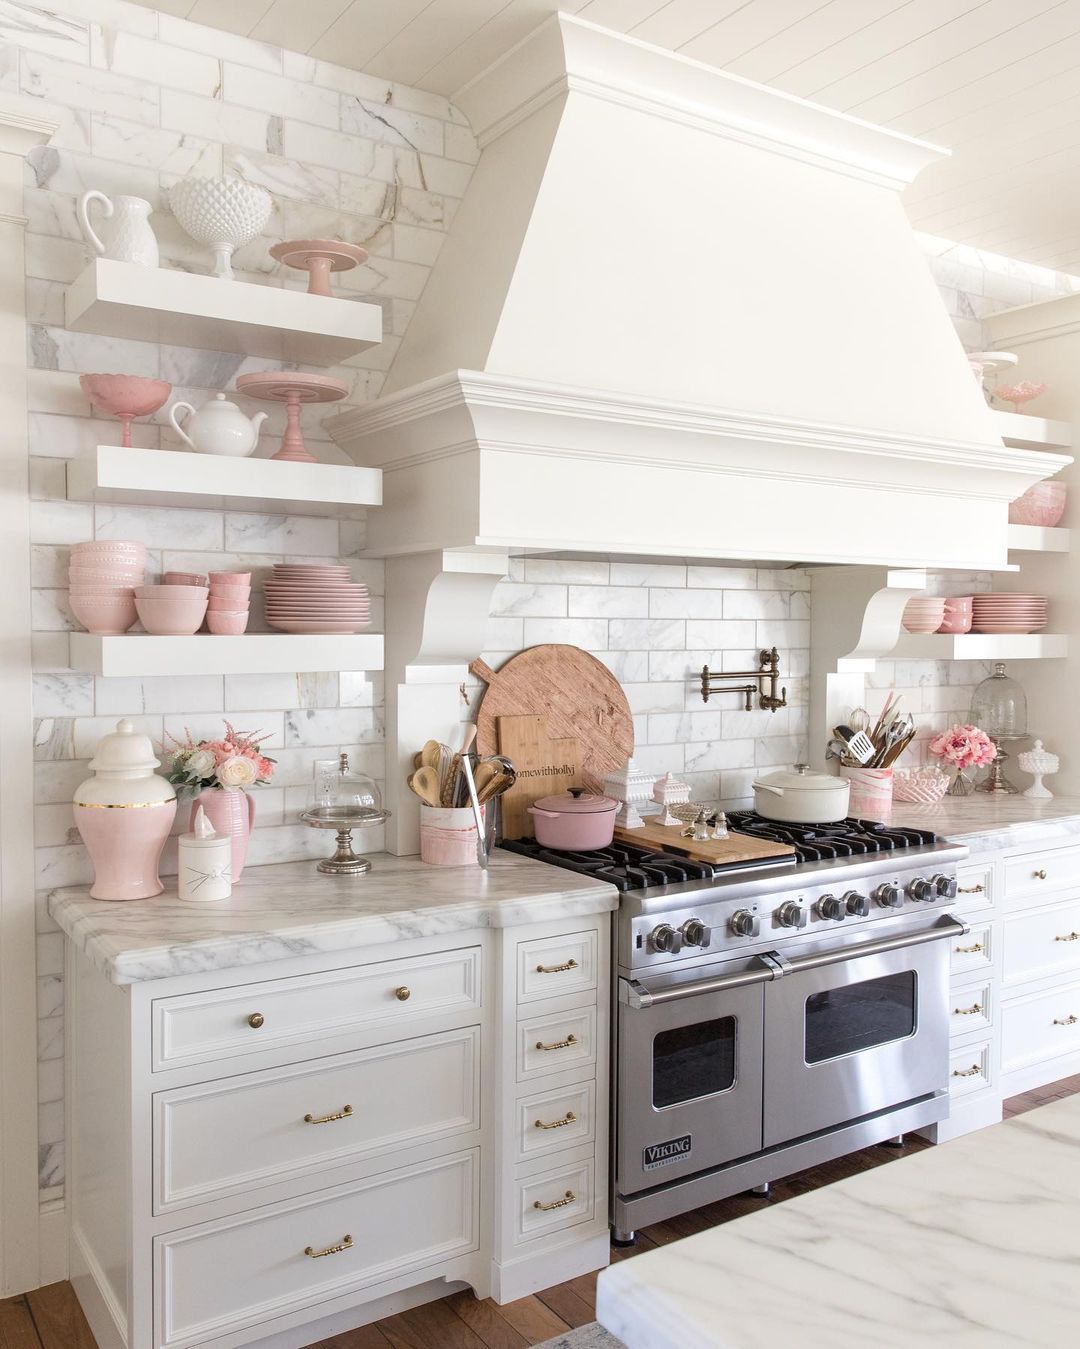 Farmhouse Style Kitchen with Open Shelving. Photo by Instagram user @homewithhollyj